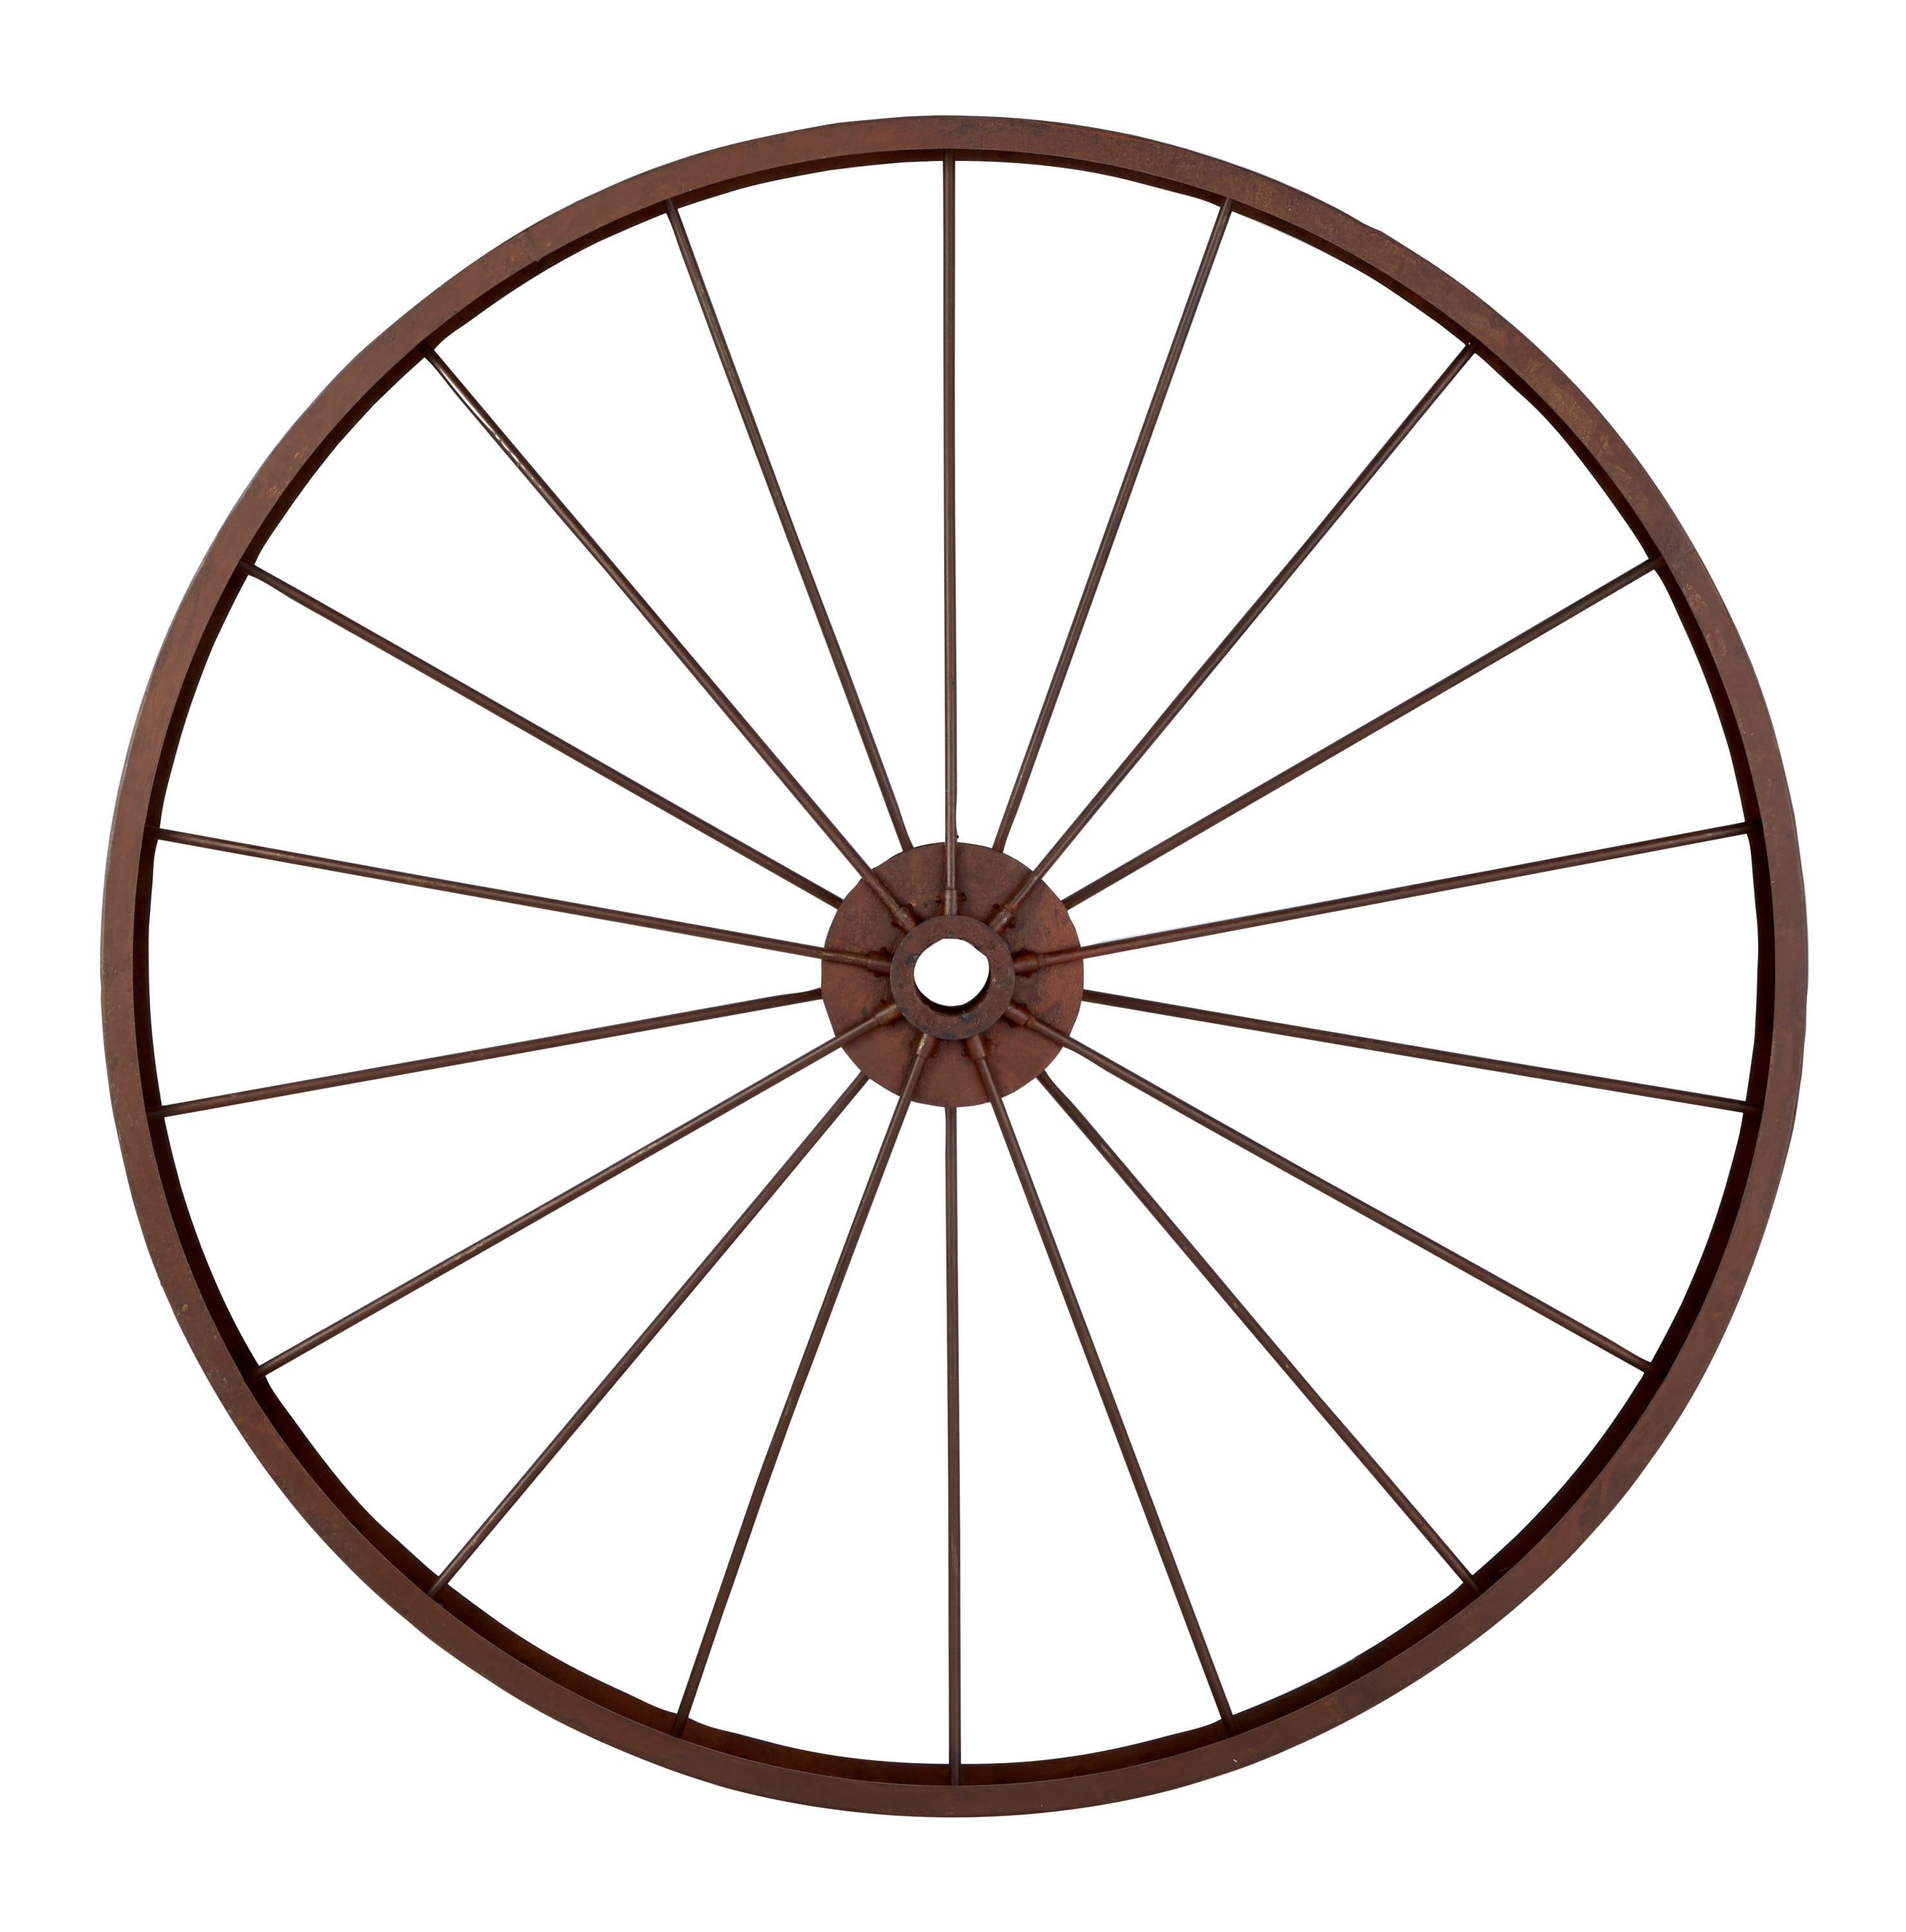 Rustic Country Style Small Antiqued Bike Wheel Decorative Wall Hanging Decor 